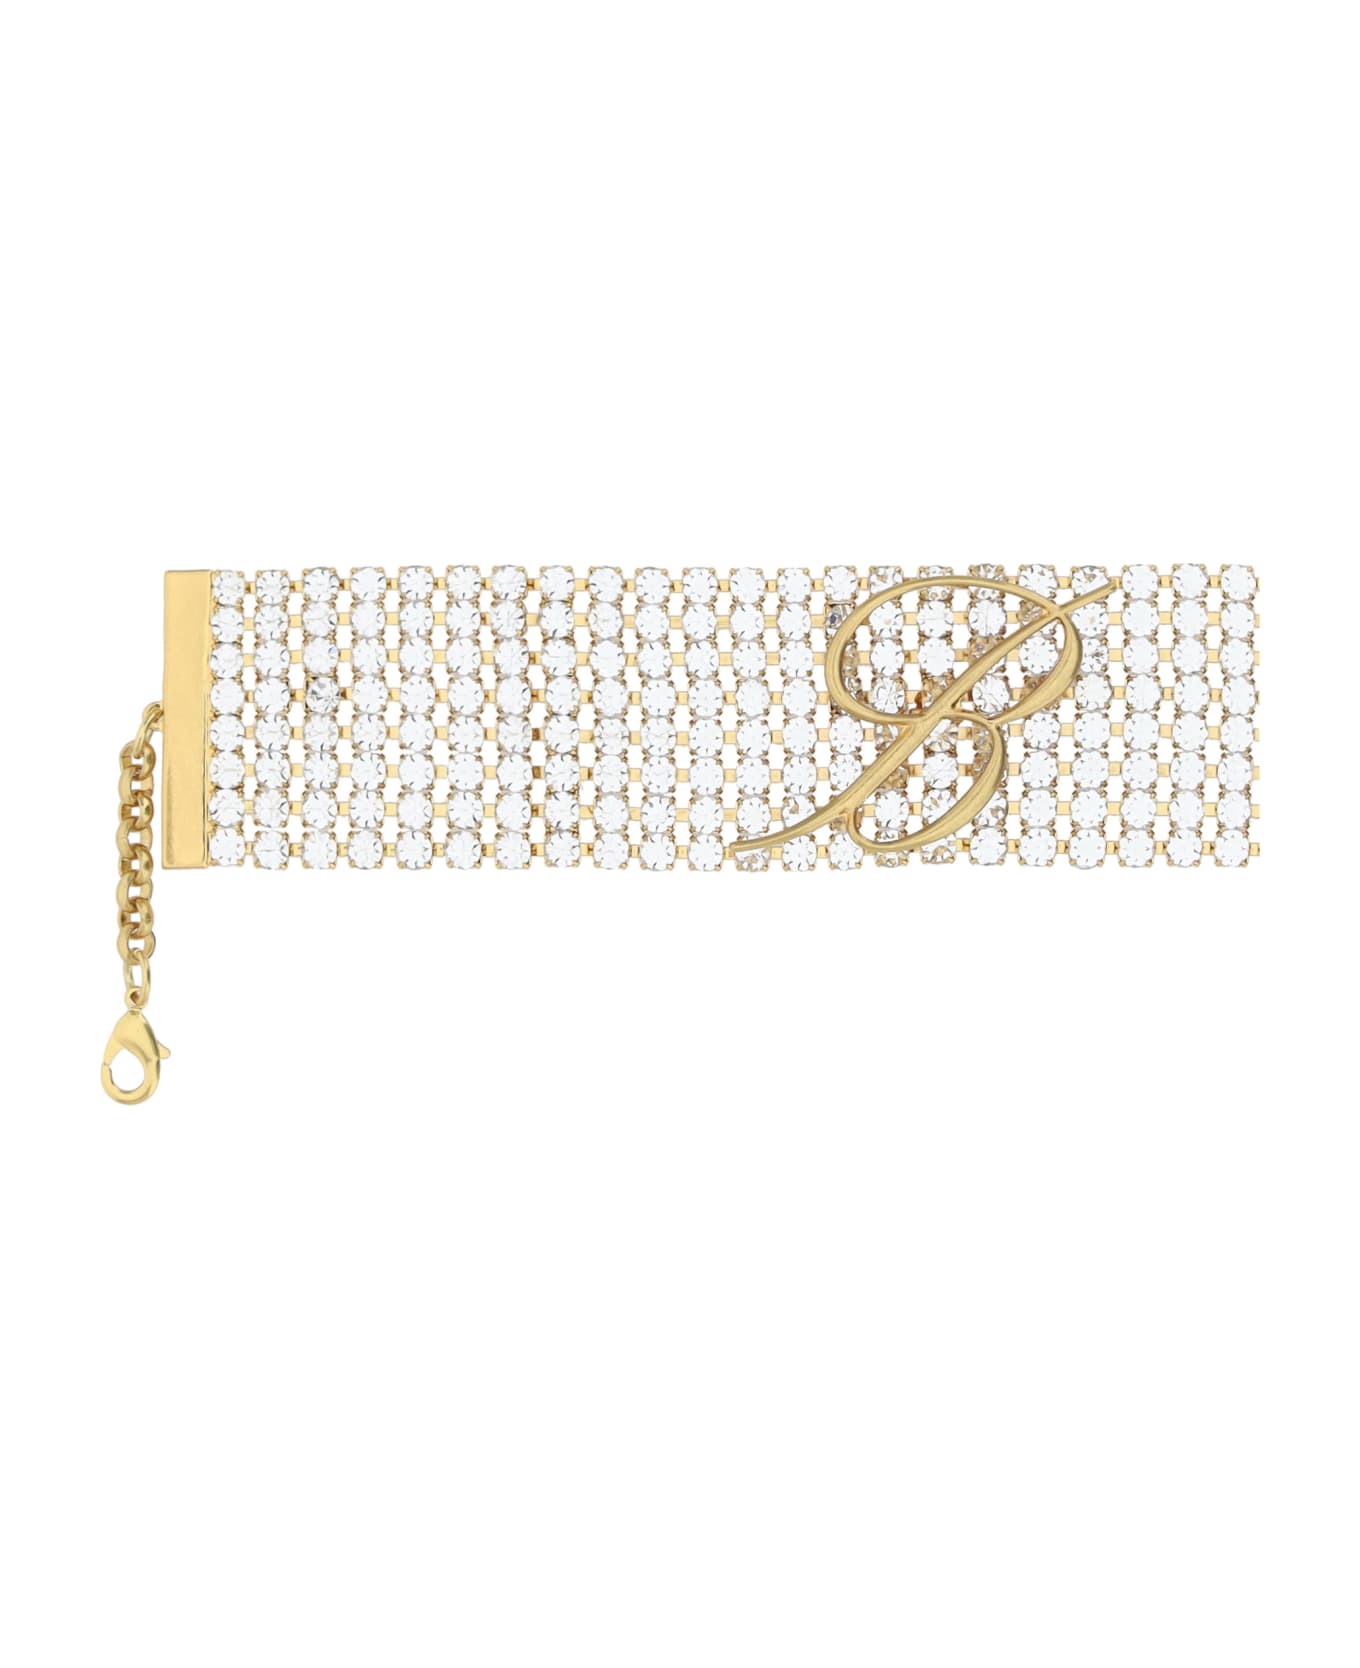 Blumarine Choker Necklace - GOLD/SILVER ネックレス